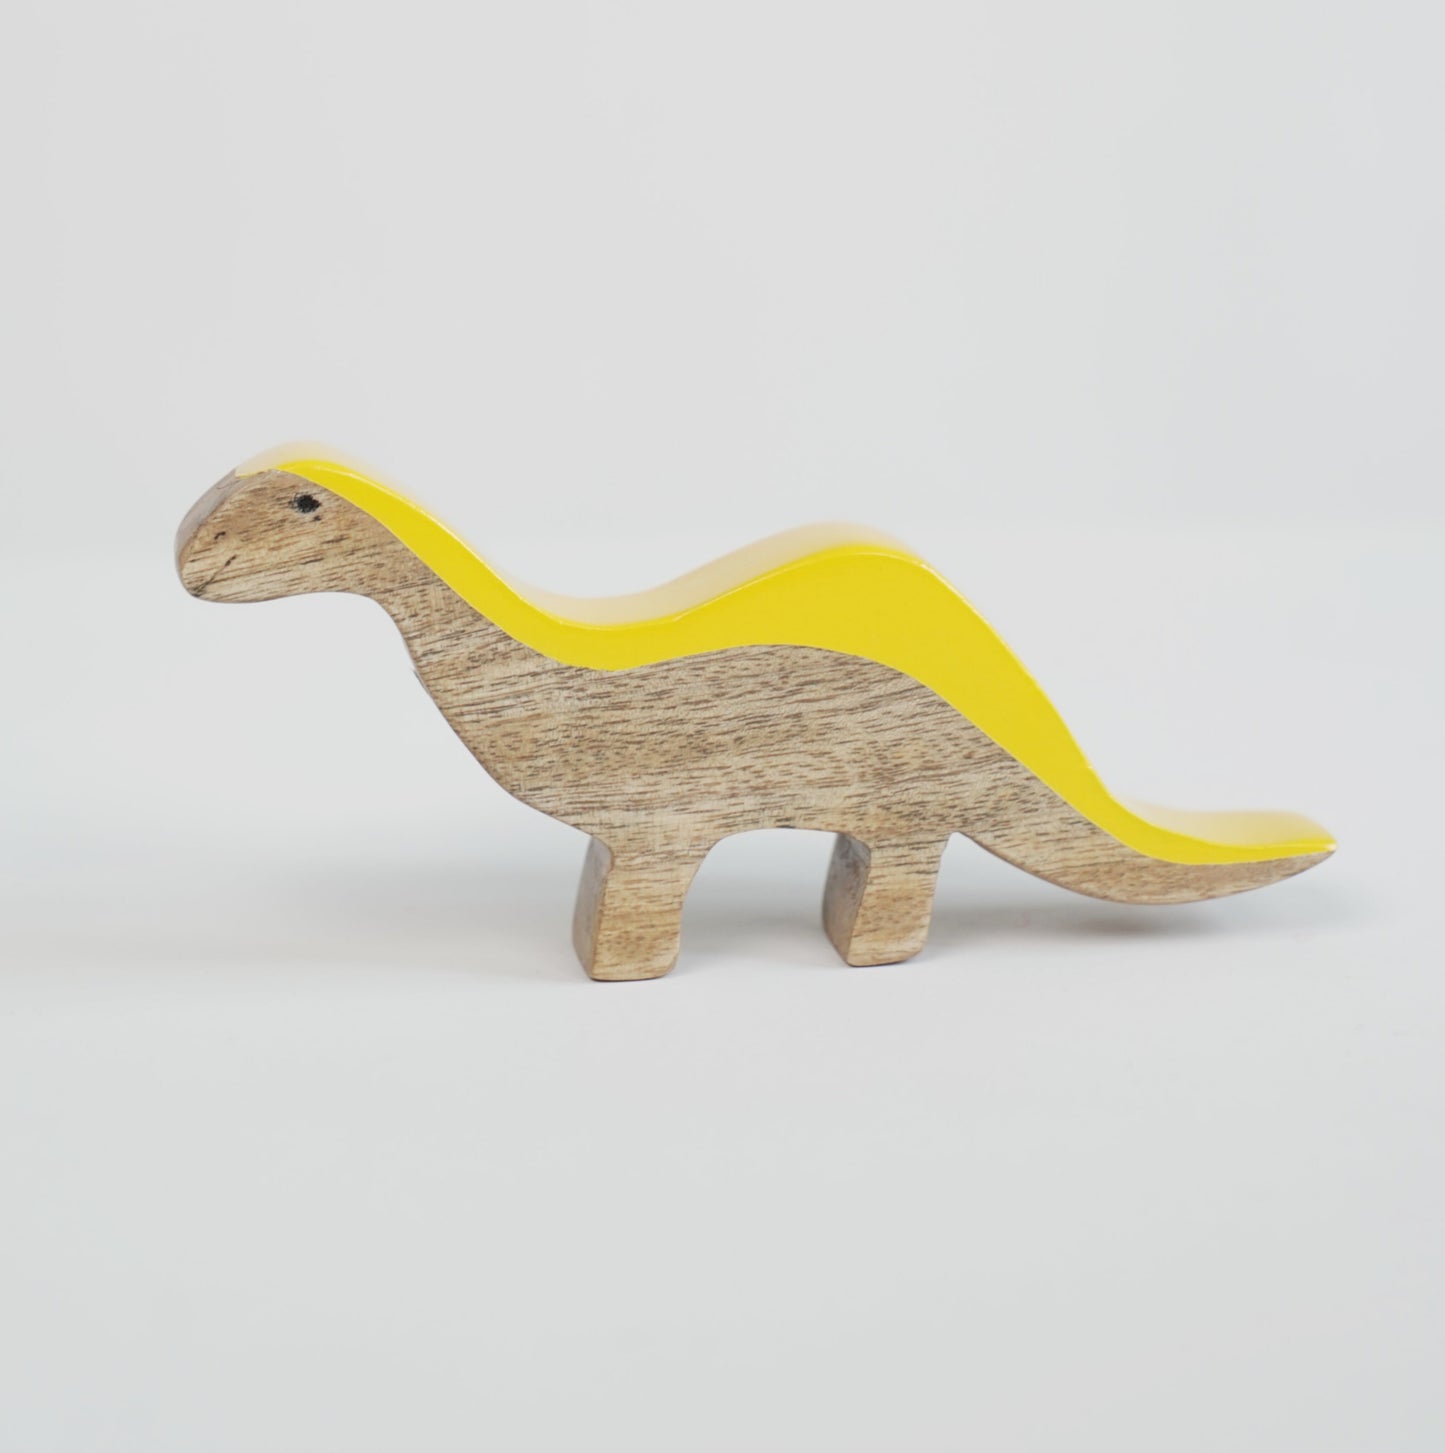 Dinosaur Wooden Toys | Animal Wooden Toys | Wild Animals Handcrafted Toys | Pretend Play